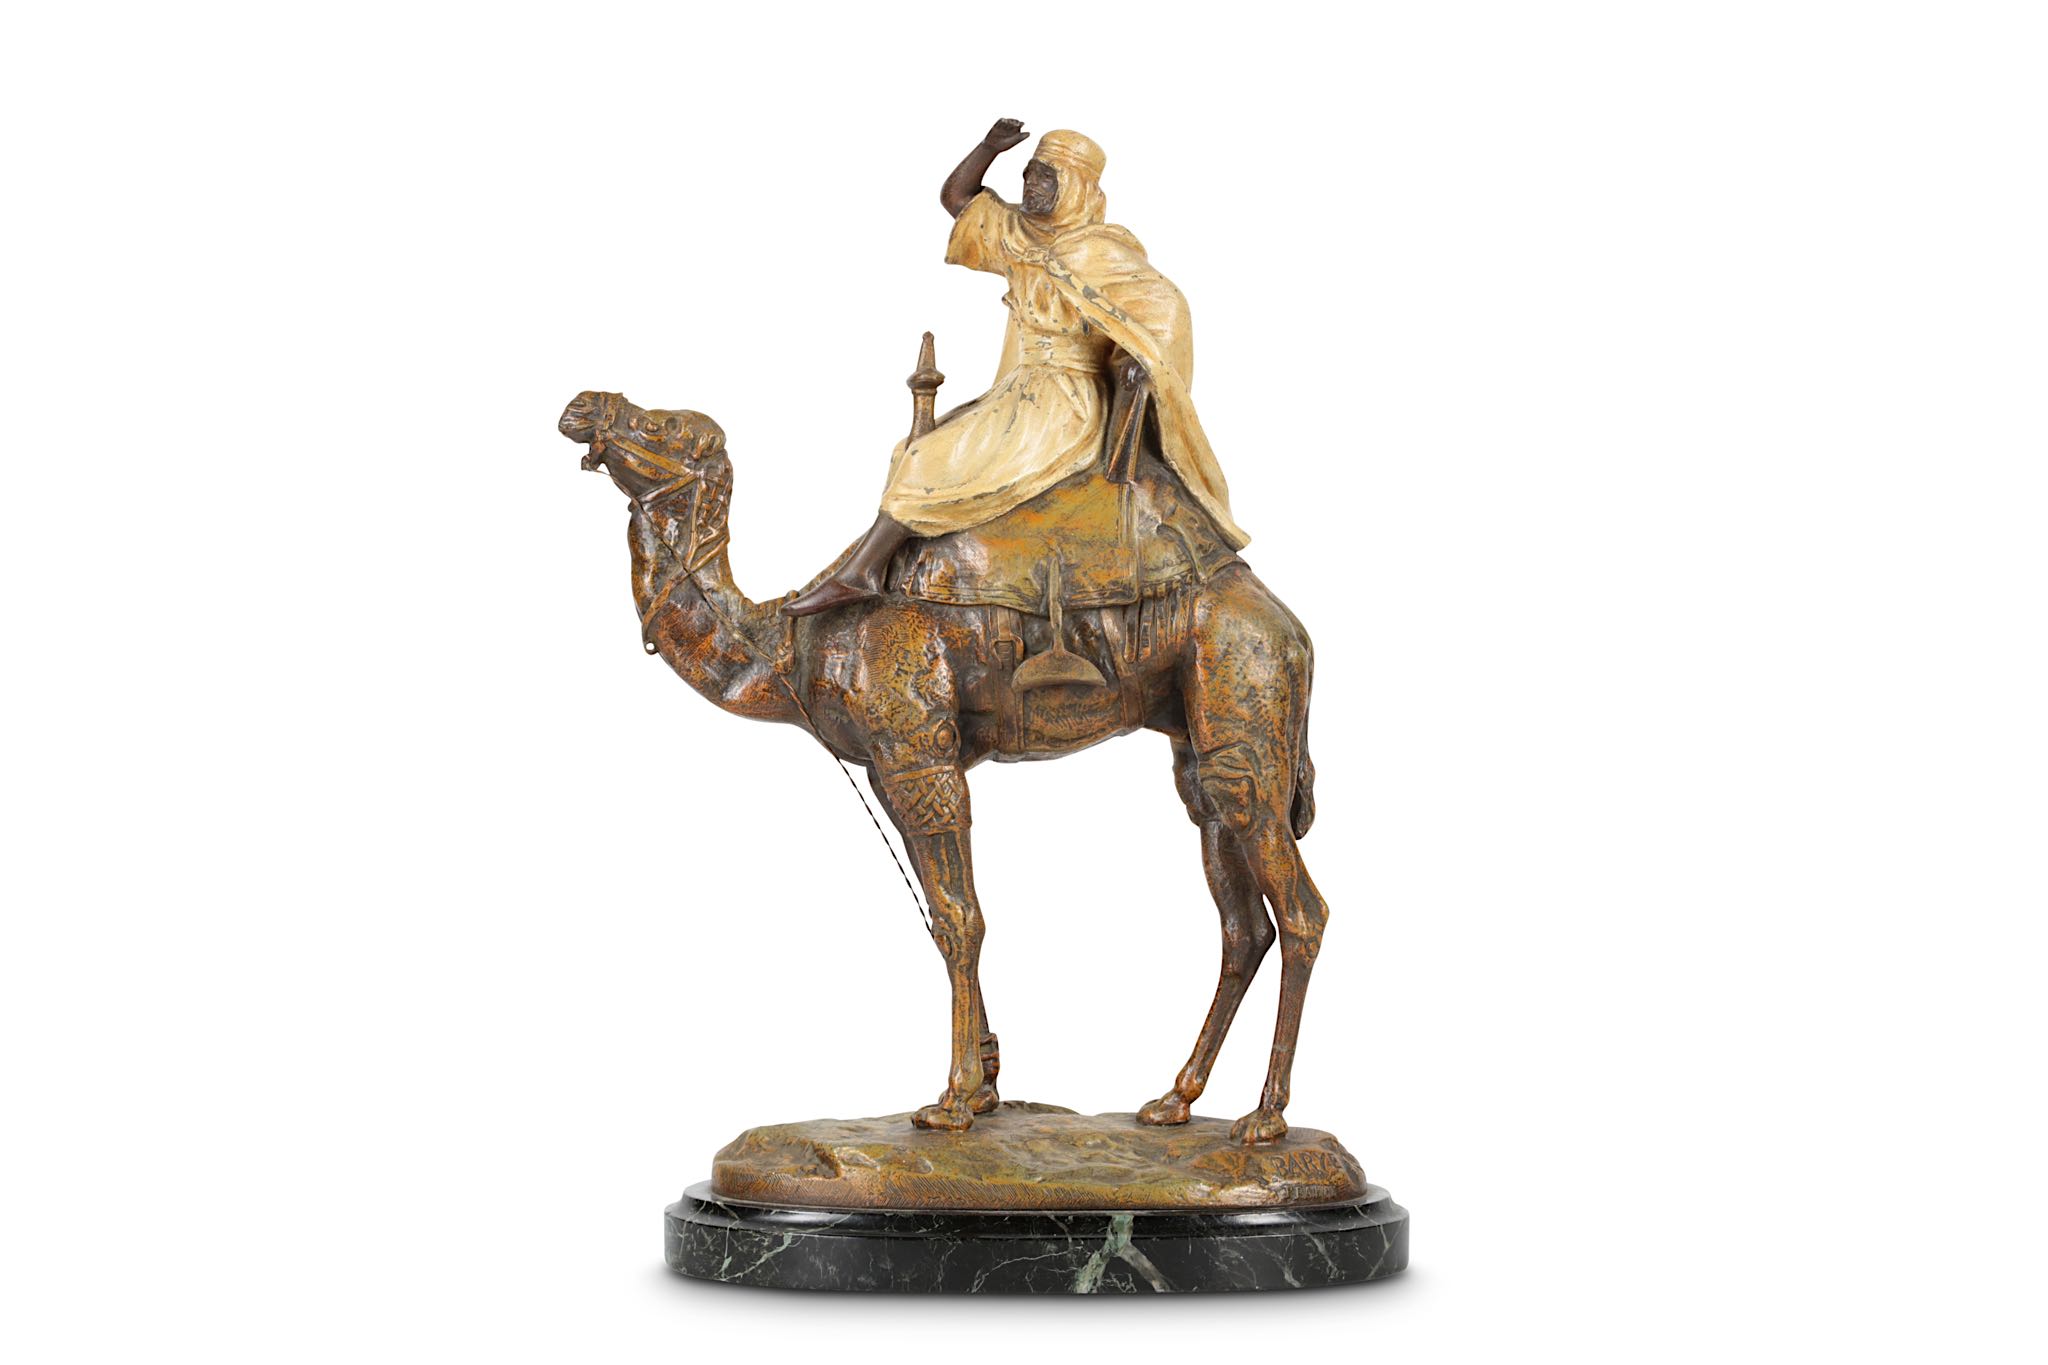 ALFRED BARYE (1839-1882): A LATE 19TH CENTURY COLD PAINTED SPELTER MODEL OF AN ARAB RIDING A